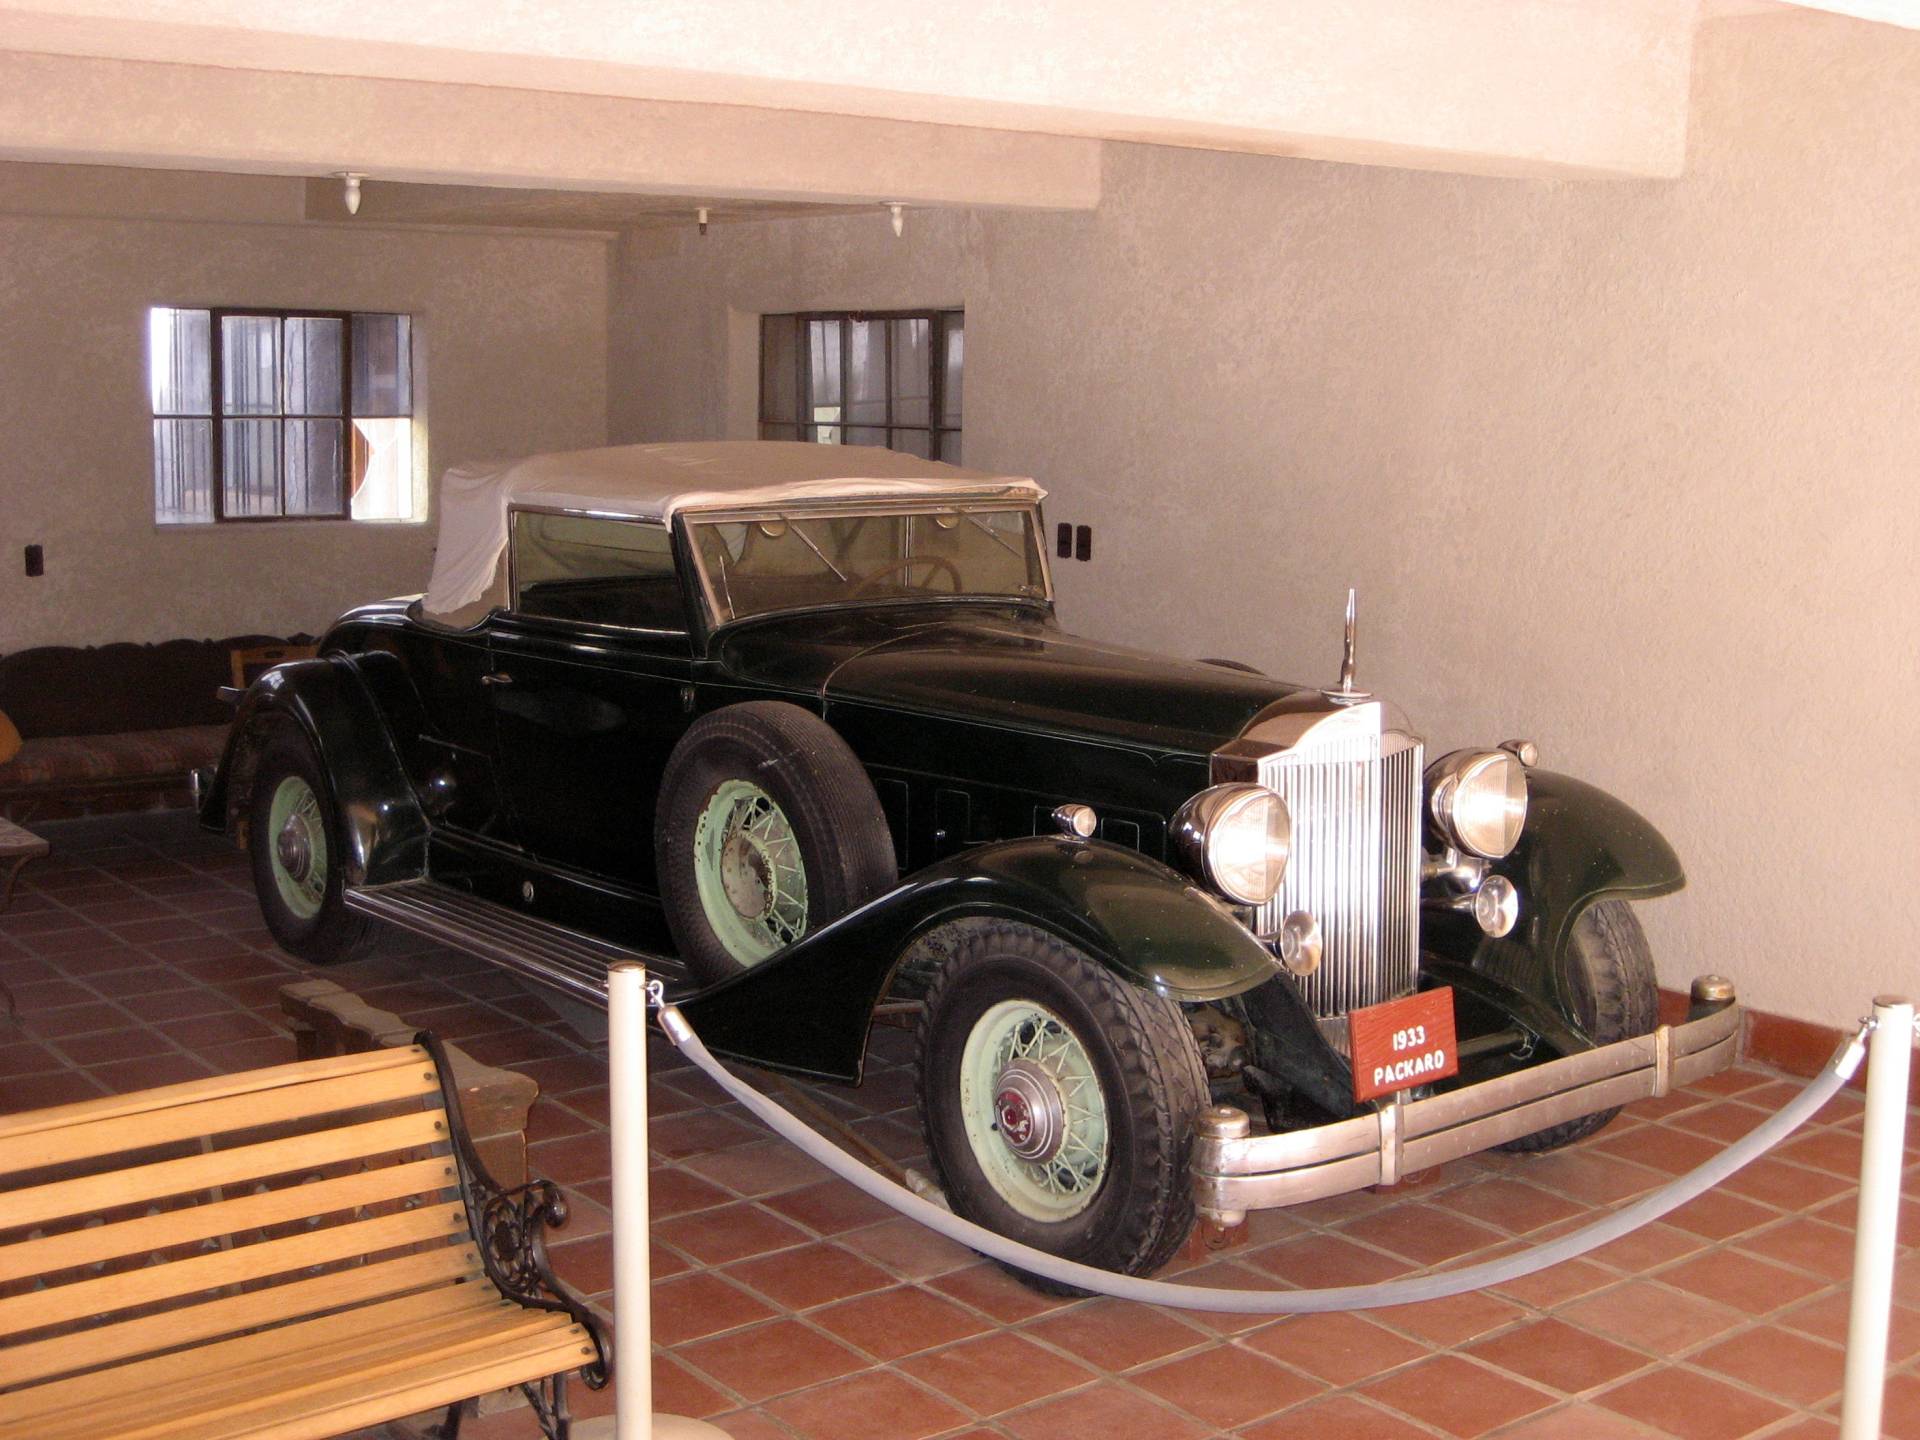 Car at Scotty's Castle, Death Valley National Park, California